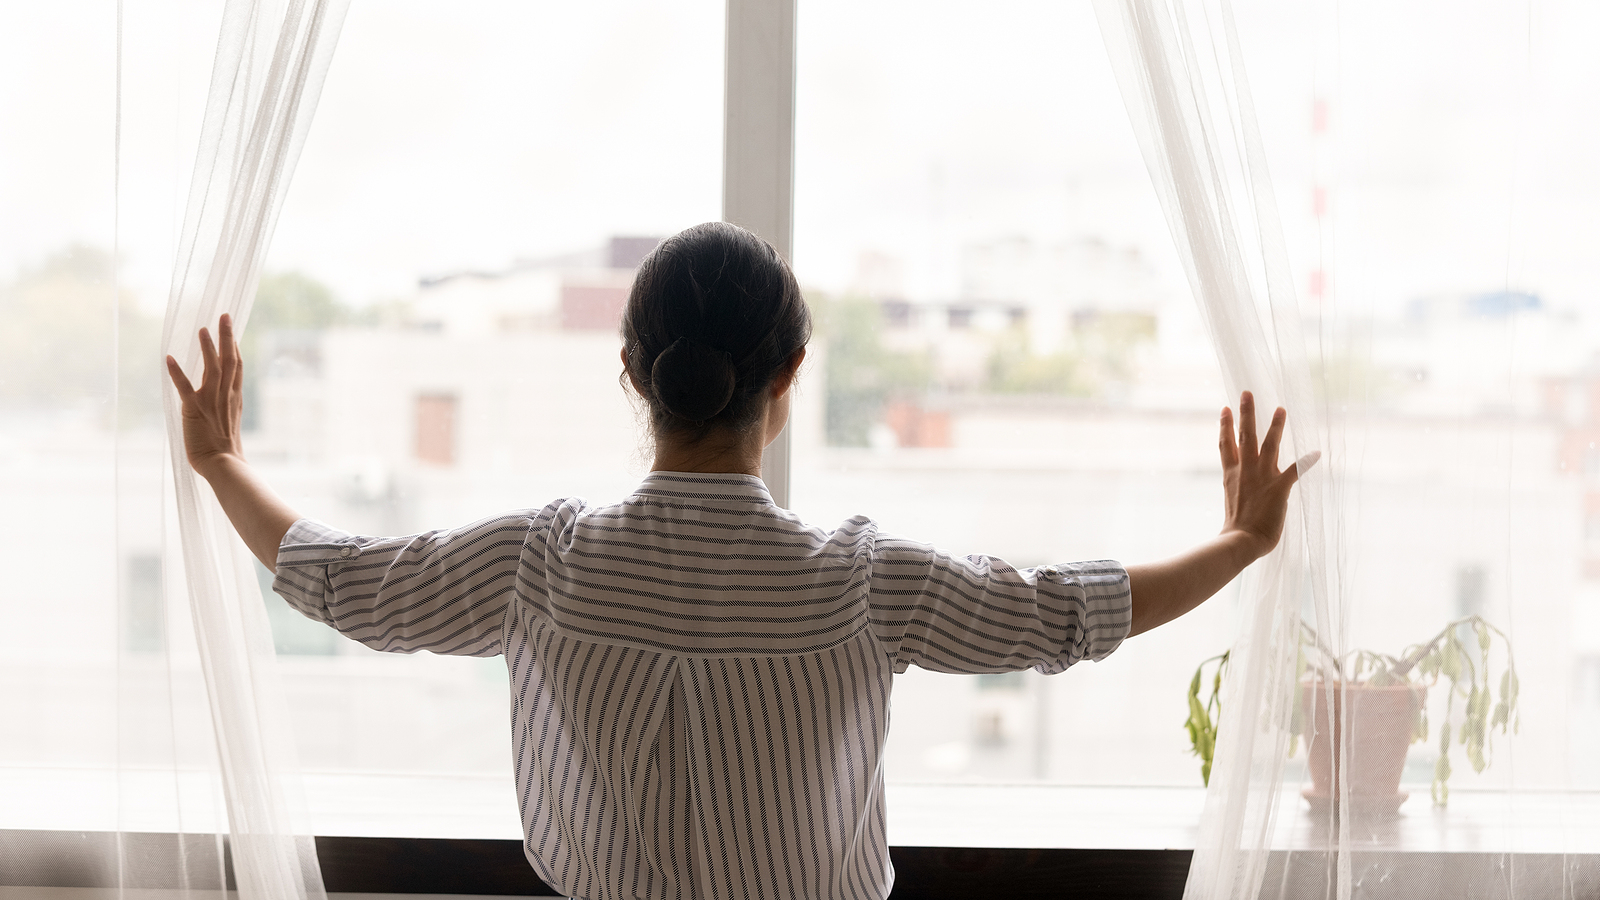 Woman stands in front of lardge window looking out at the world. PE therapy is shown to help treat PTSD effectively. Prolonged exposure therapy in Ohio is available to help!